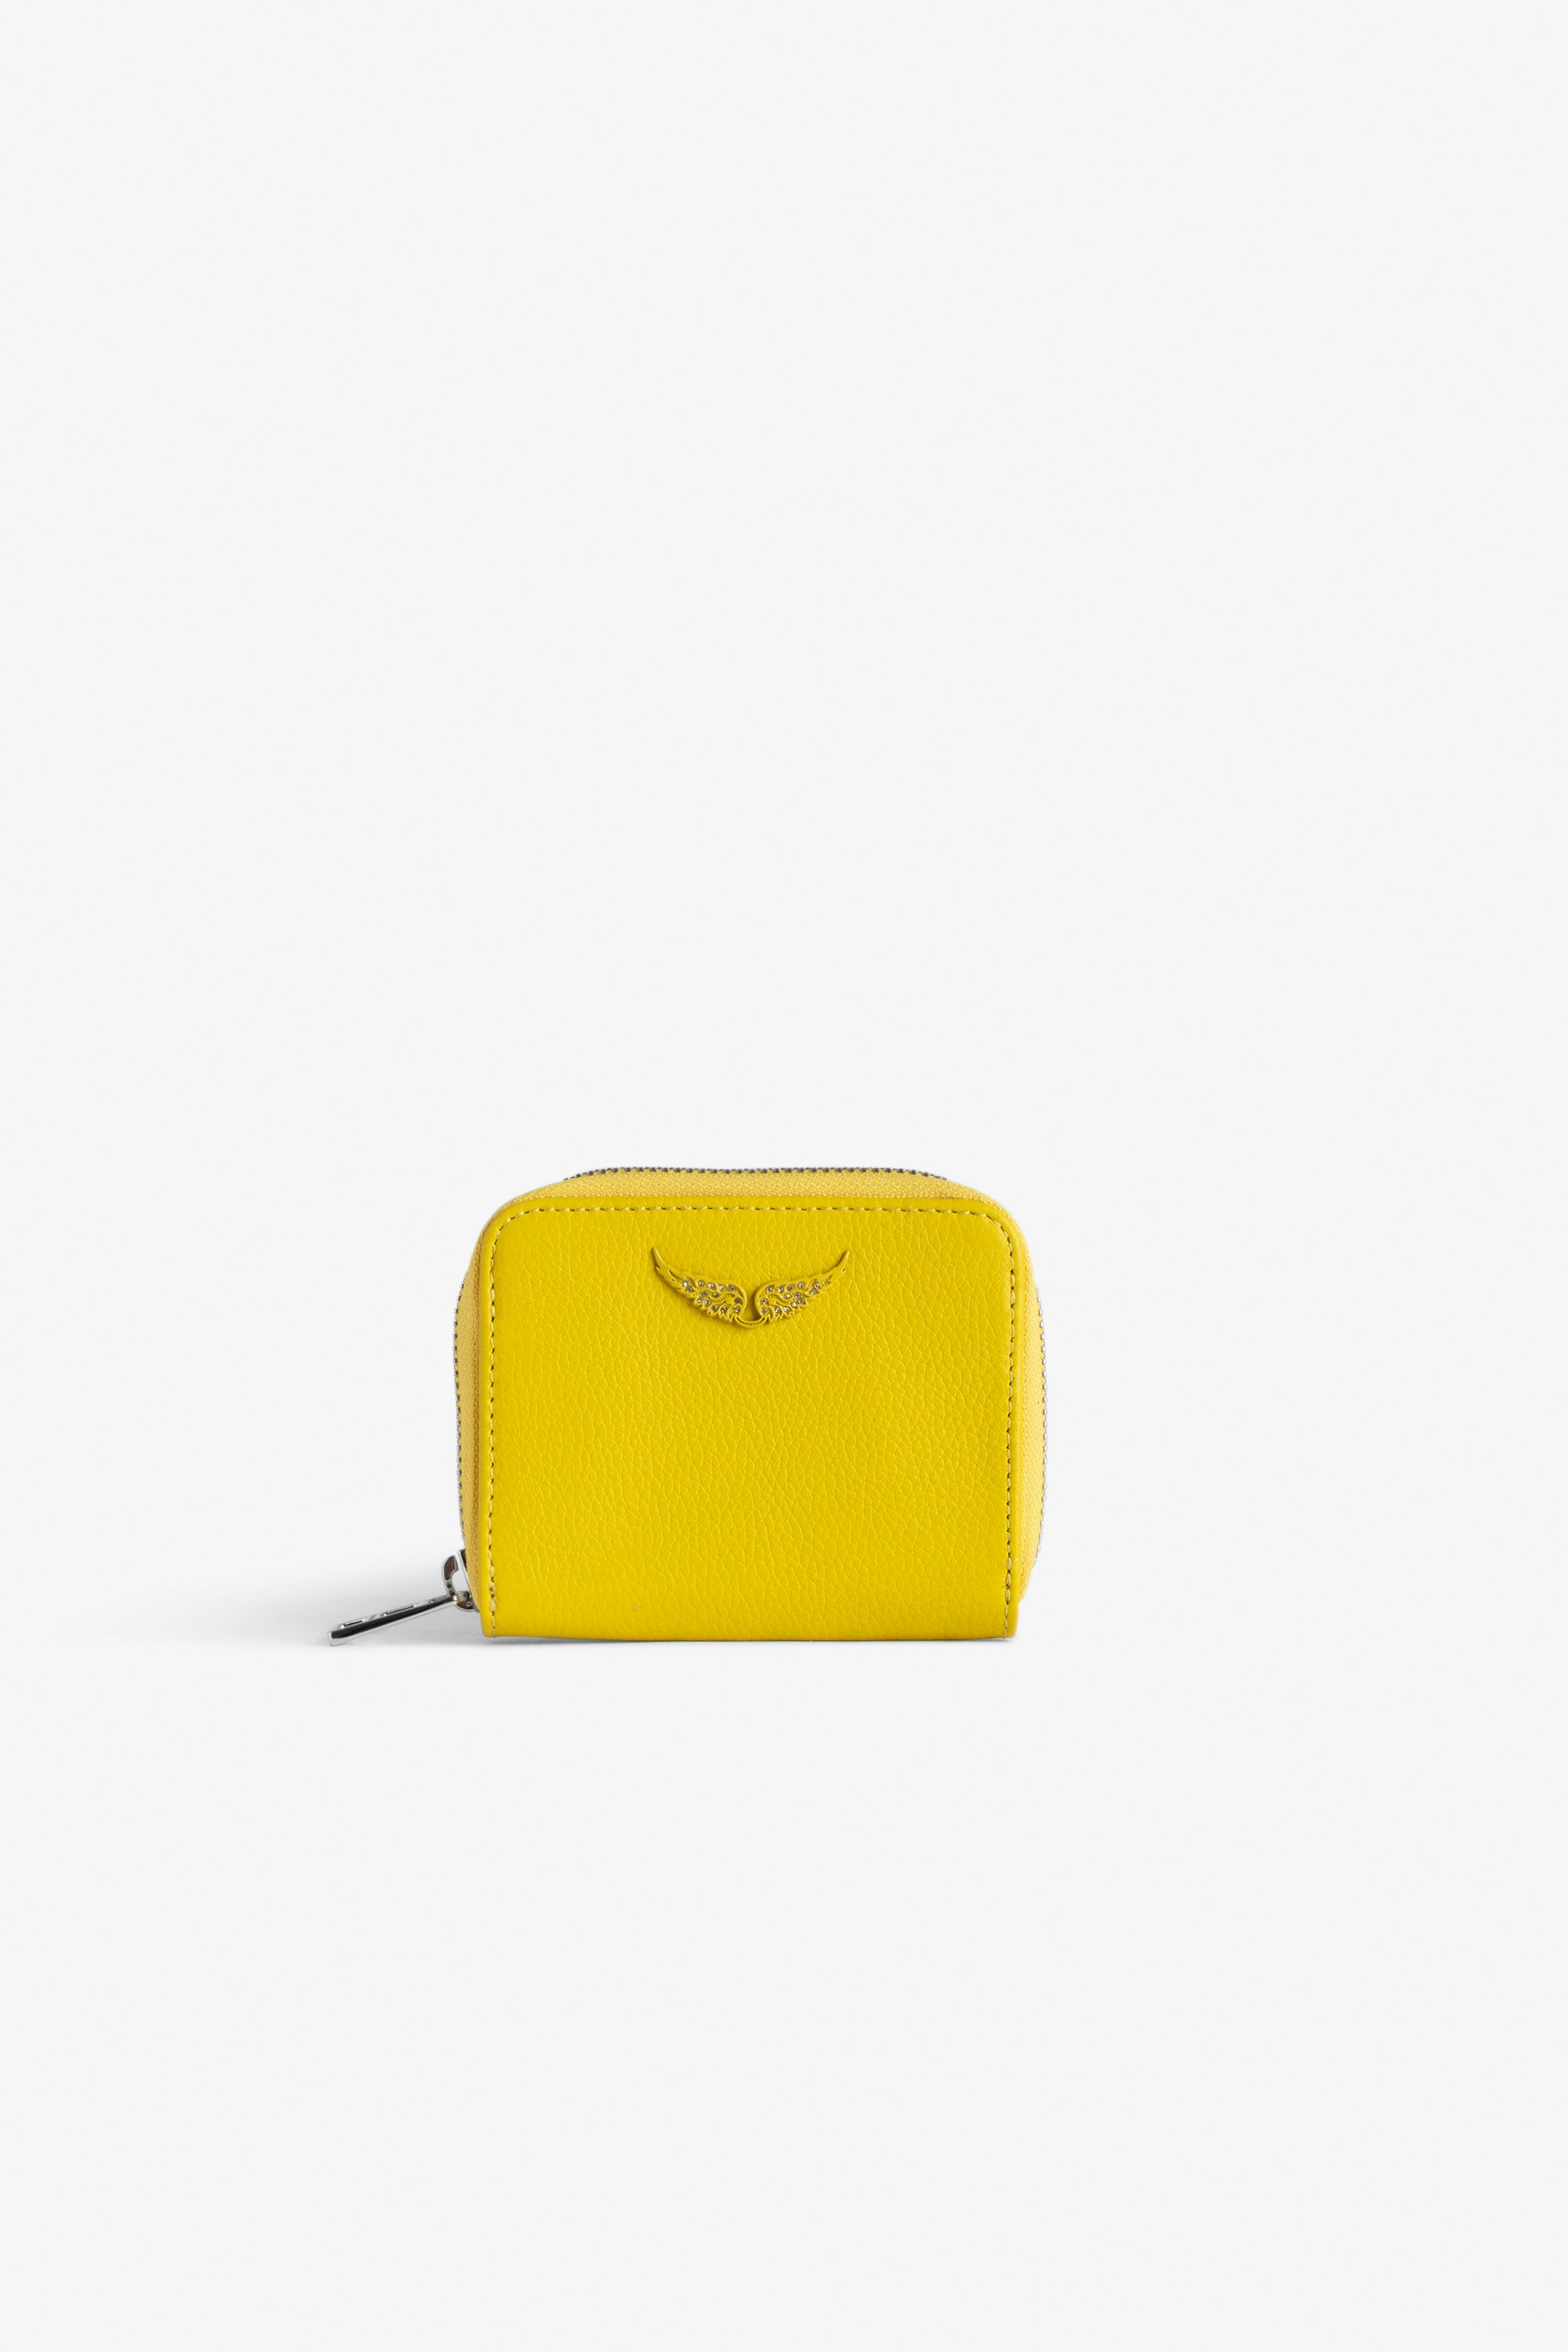 Mini ZV Coin Purse - Women’s yellow grained leather wallet with diamanté wings charm.